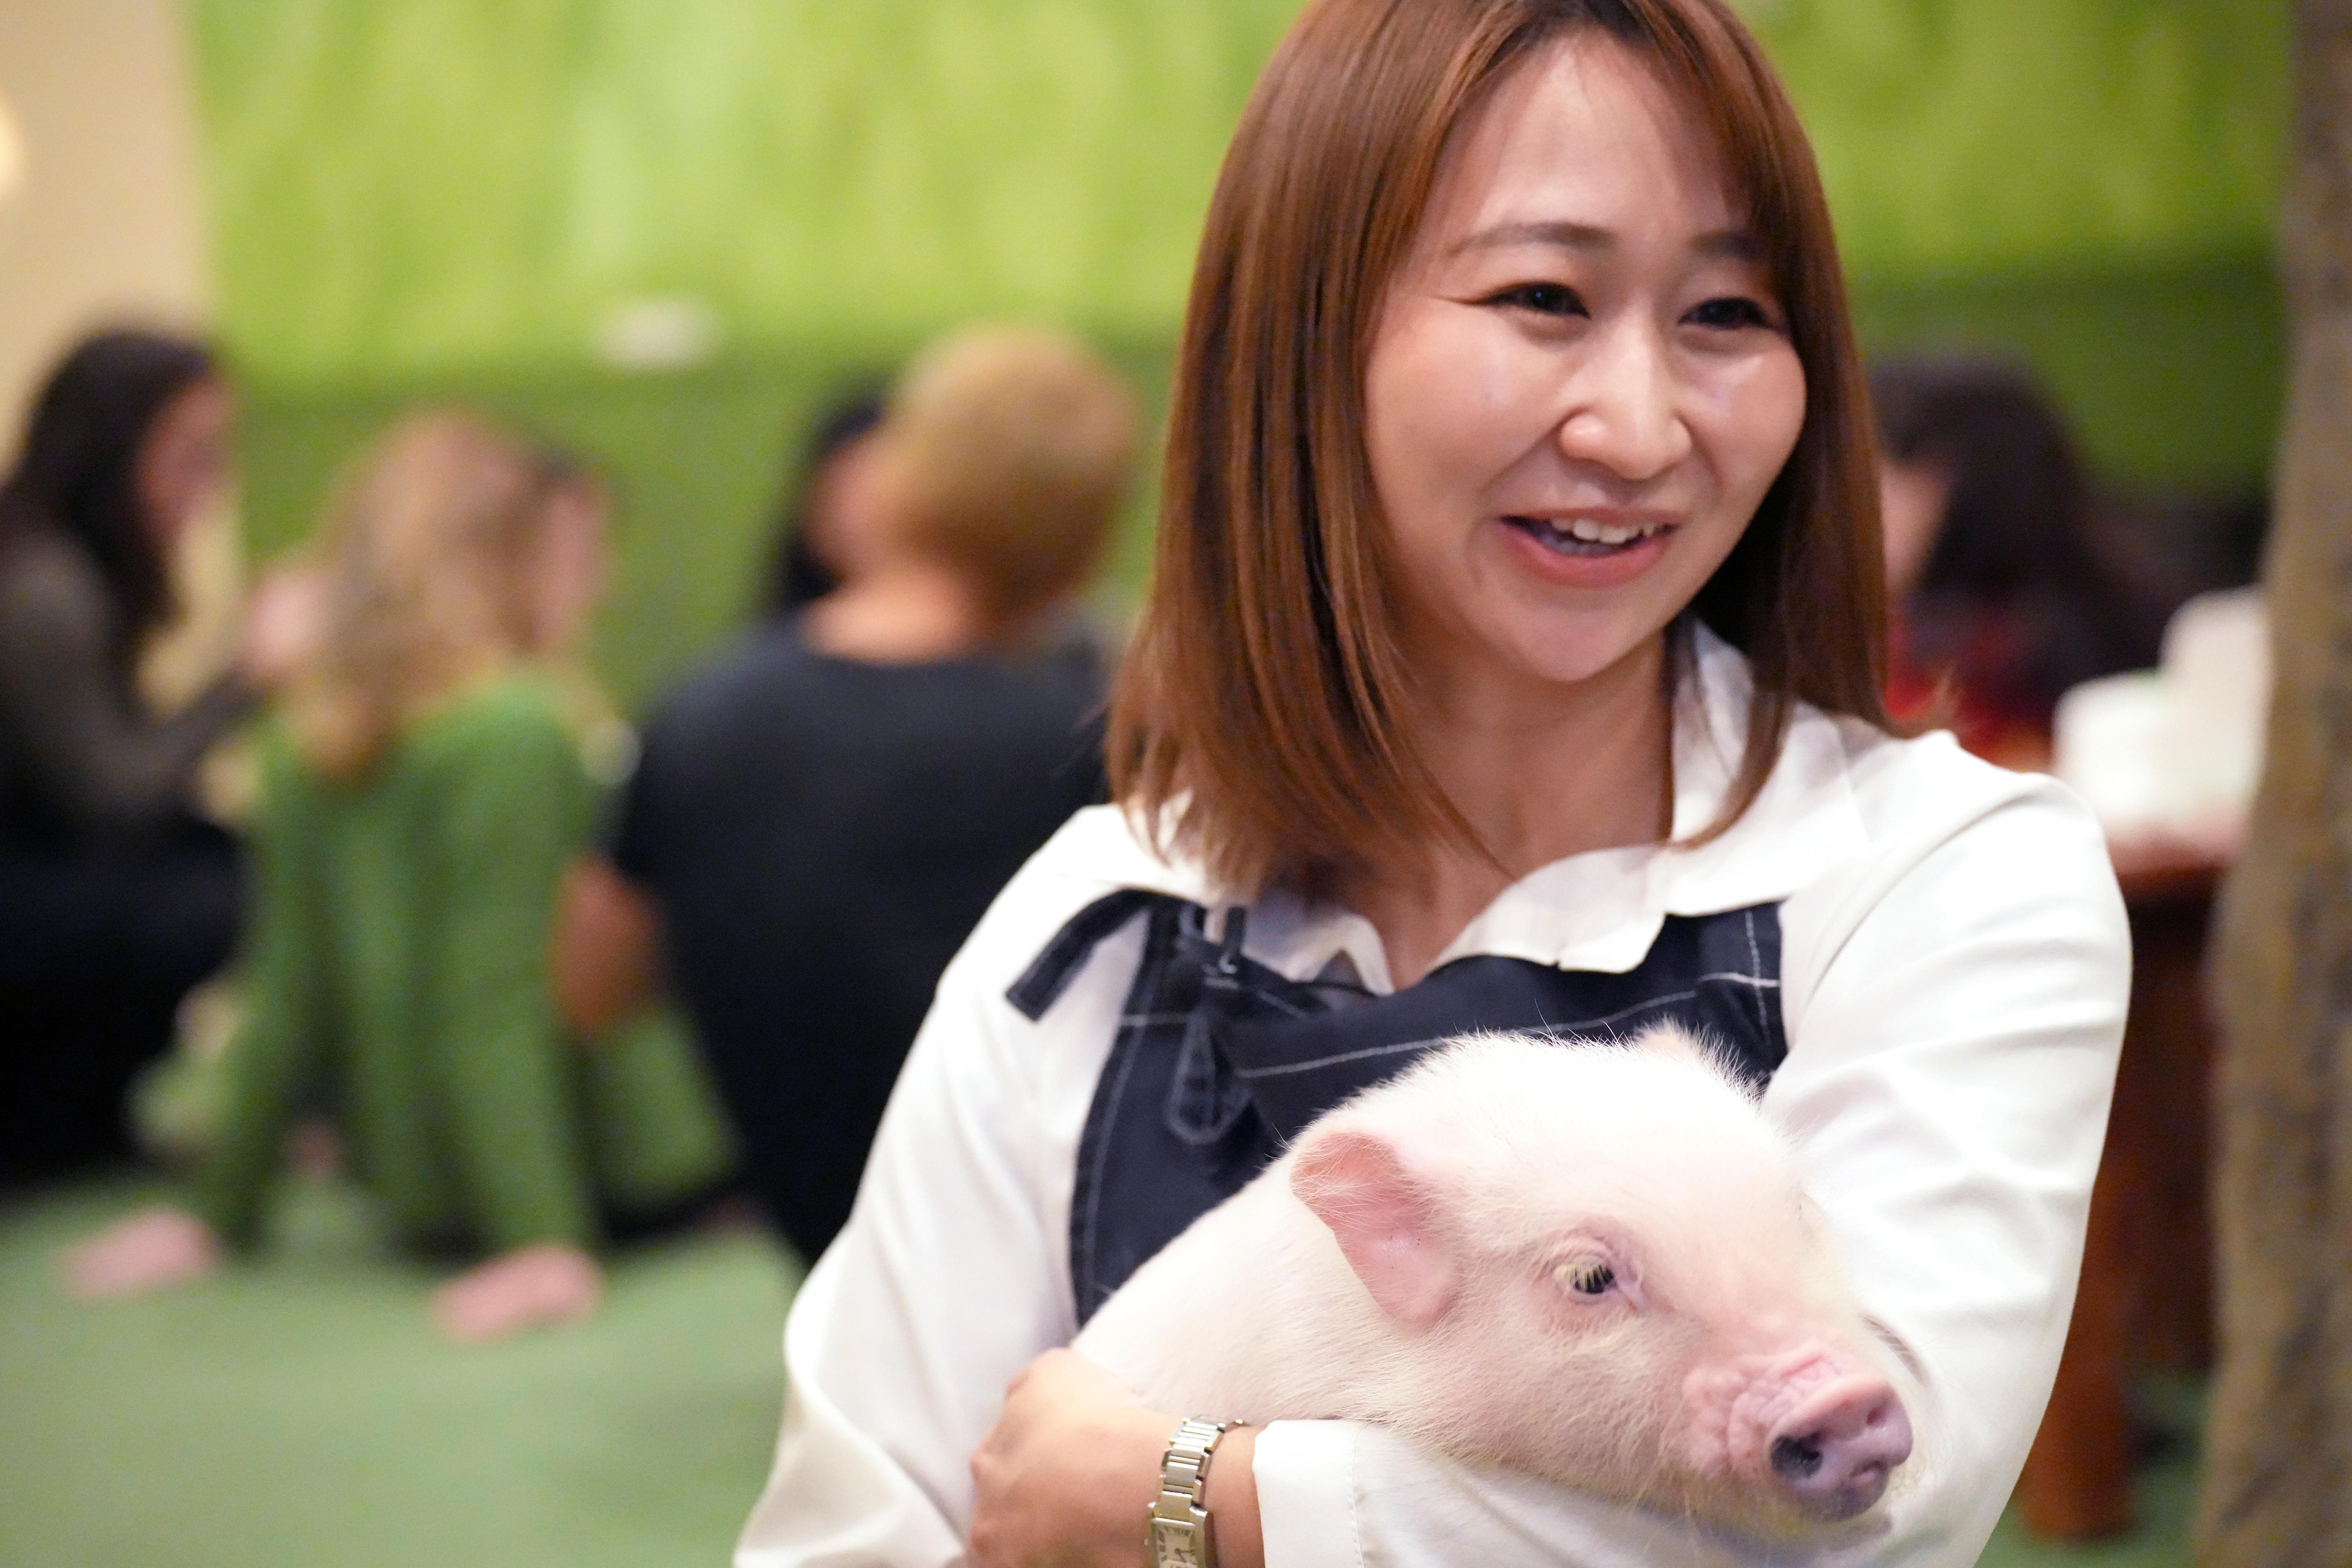 A woman holds a small pink pig in her arms and smiles.